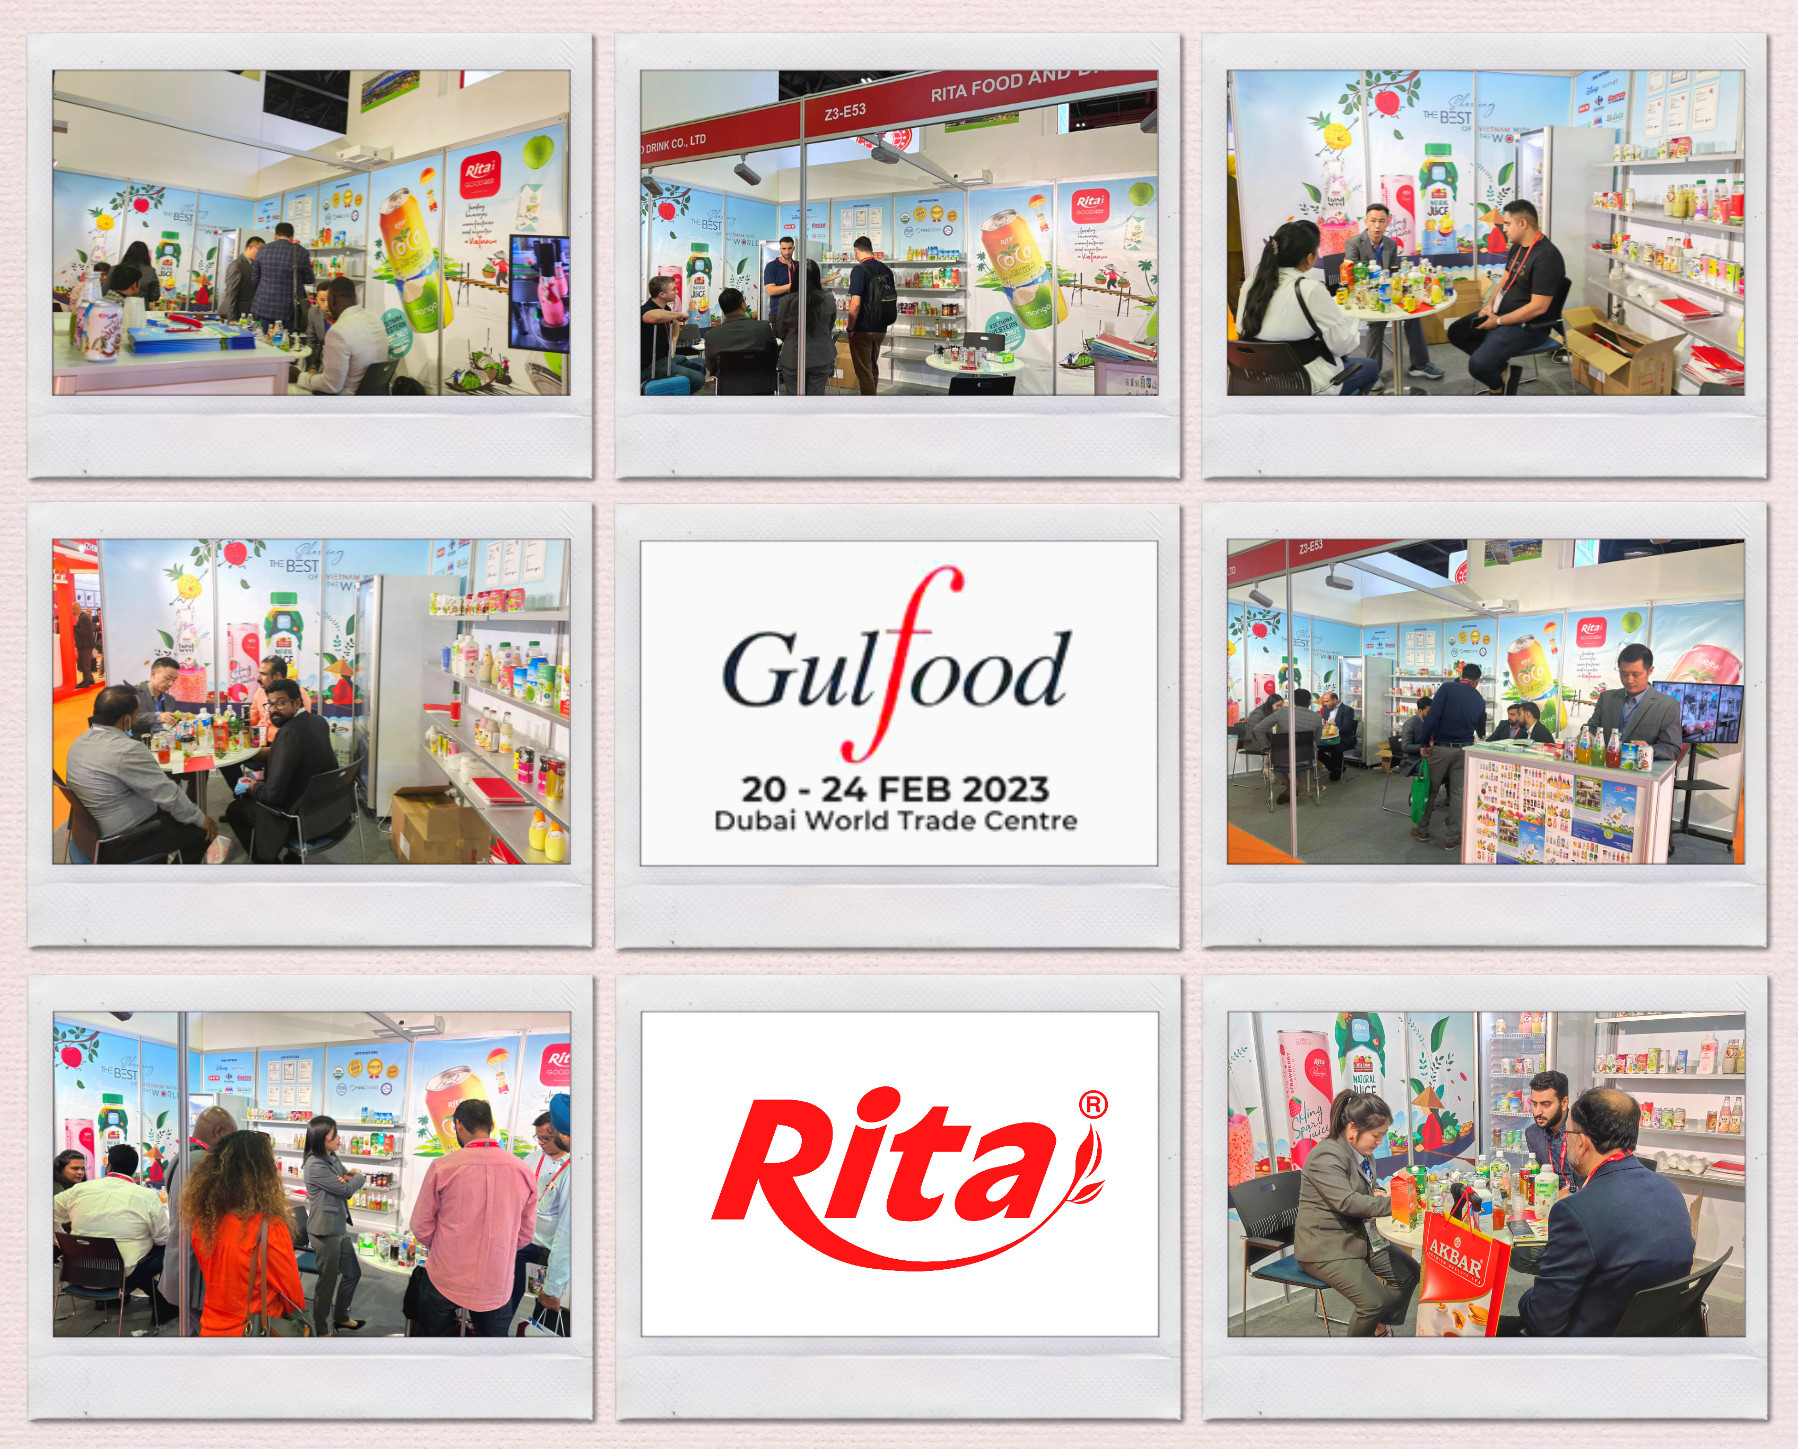 THE ICONIC GULFOOD 2023 EXHIBITION